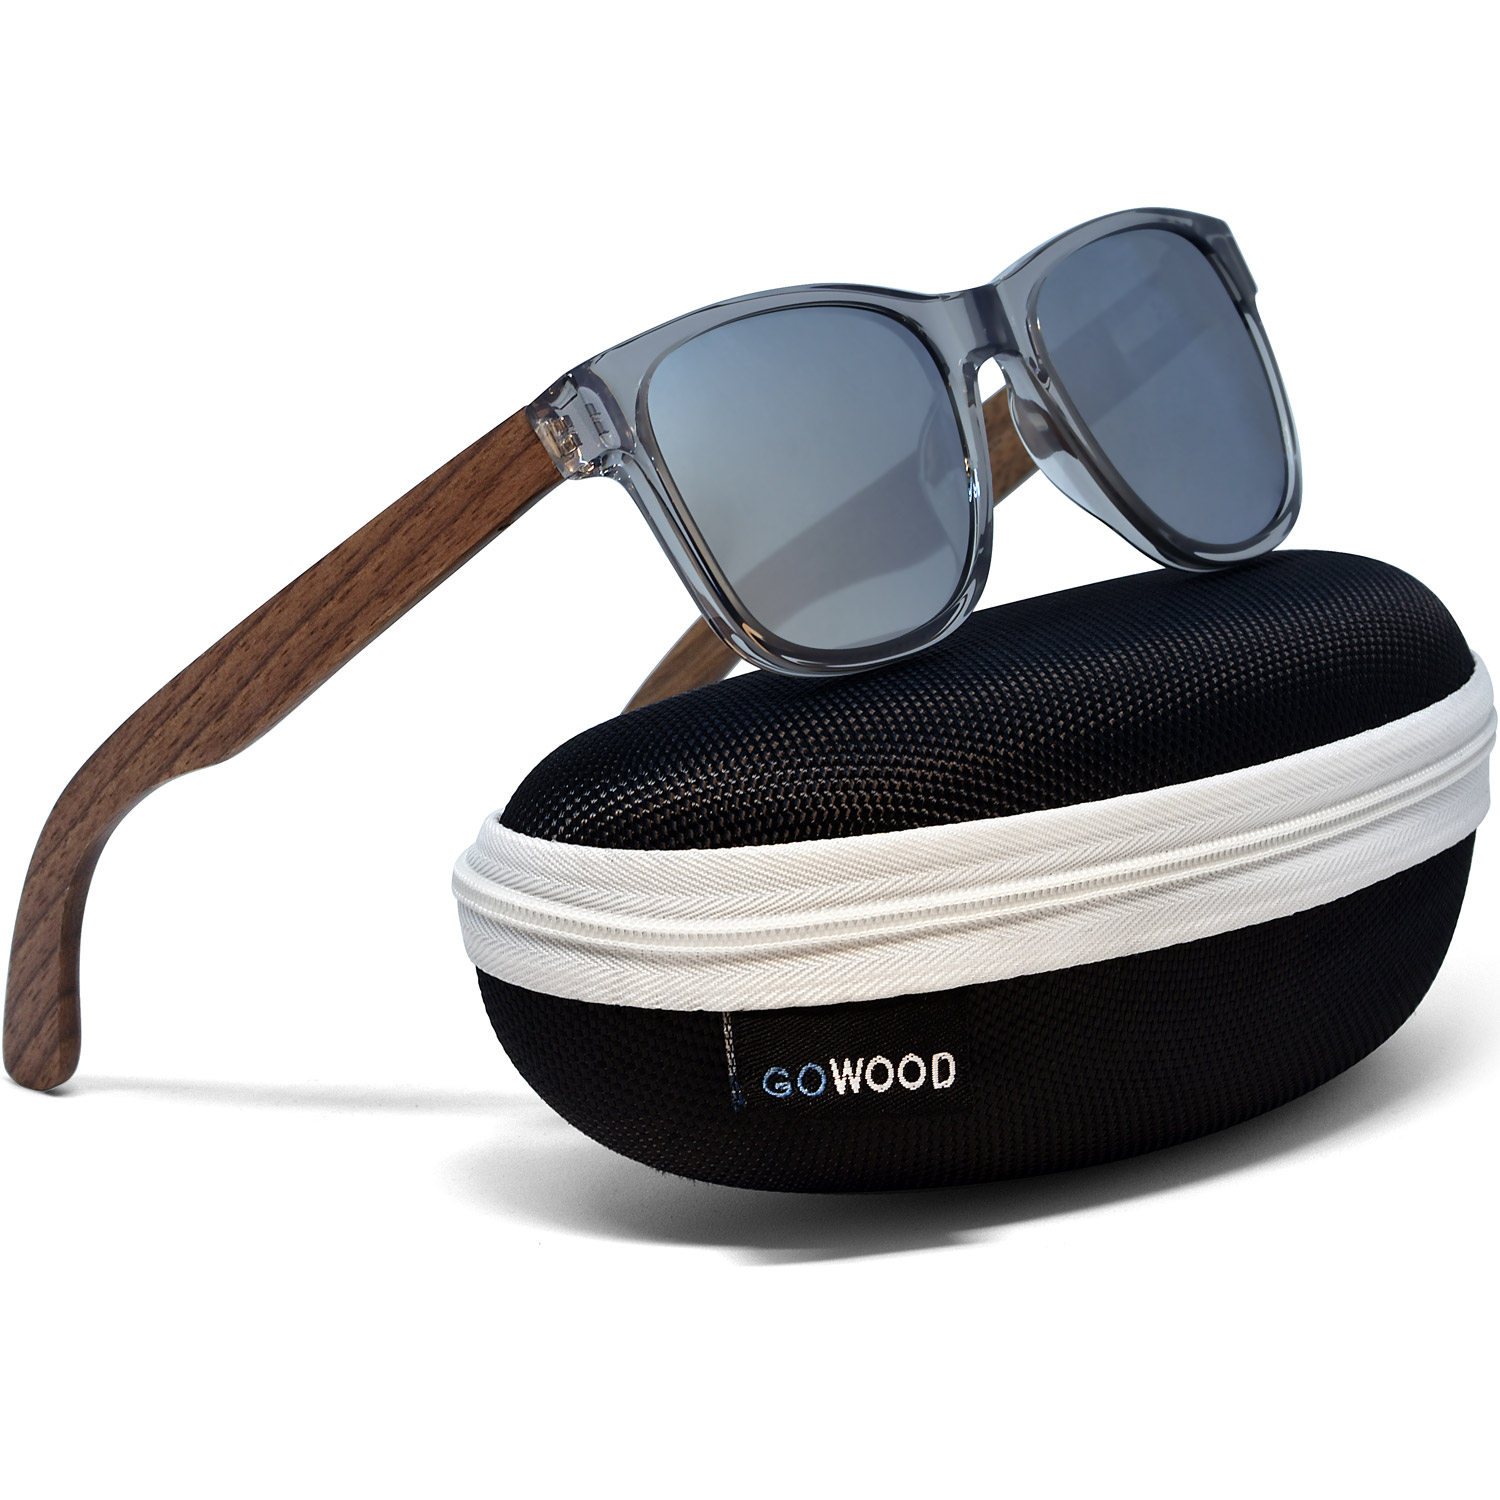 Walnut wood sunglasses classic style transparent frame with silver lenses zipper case